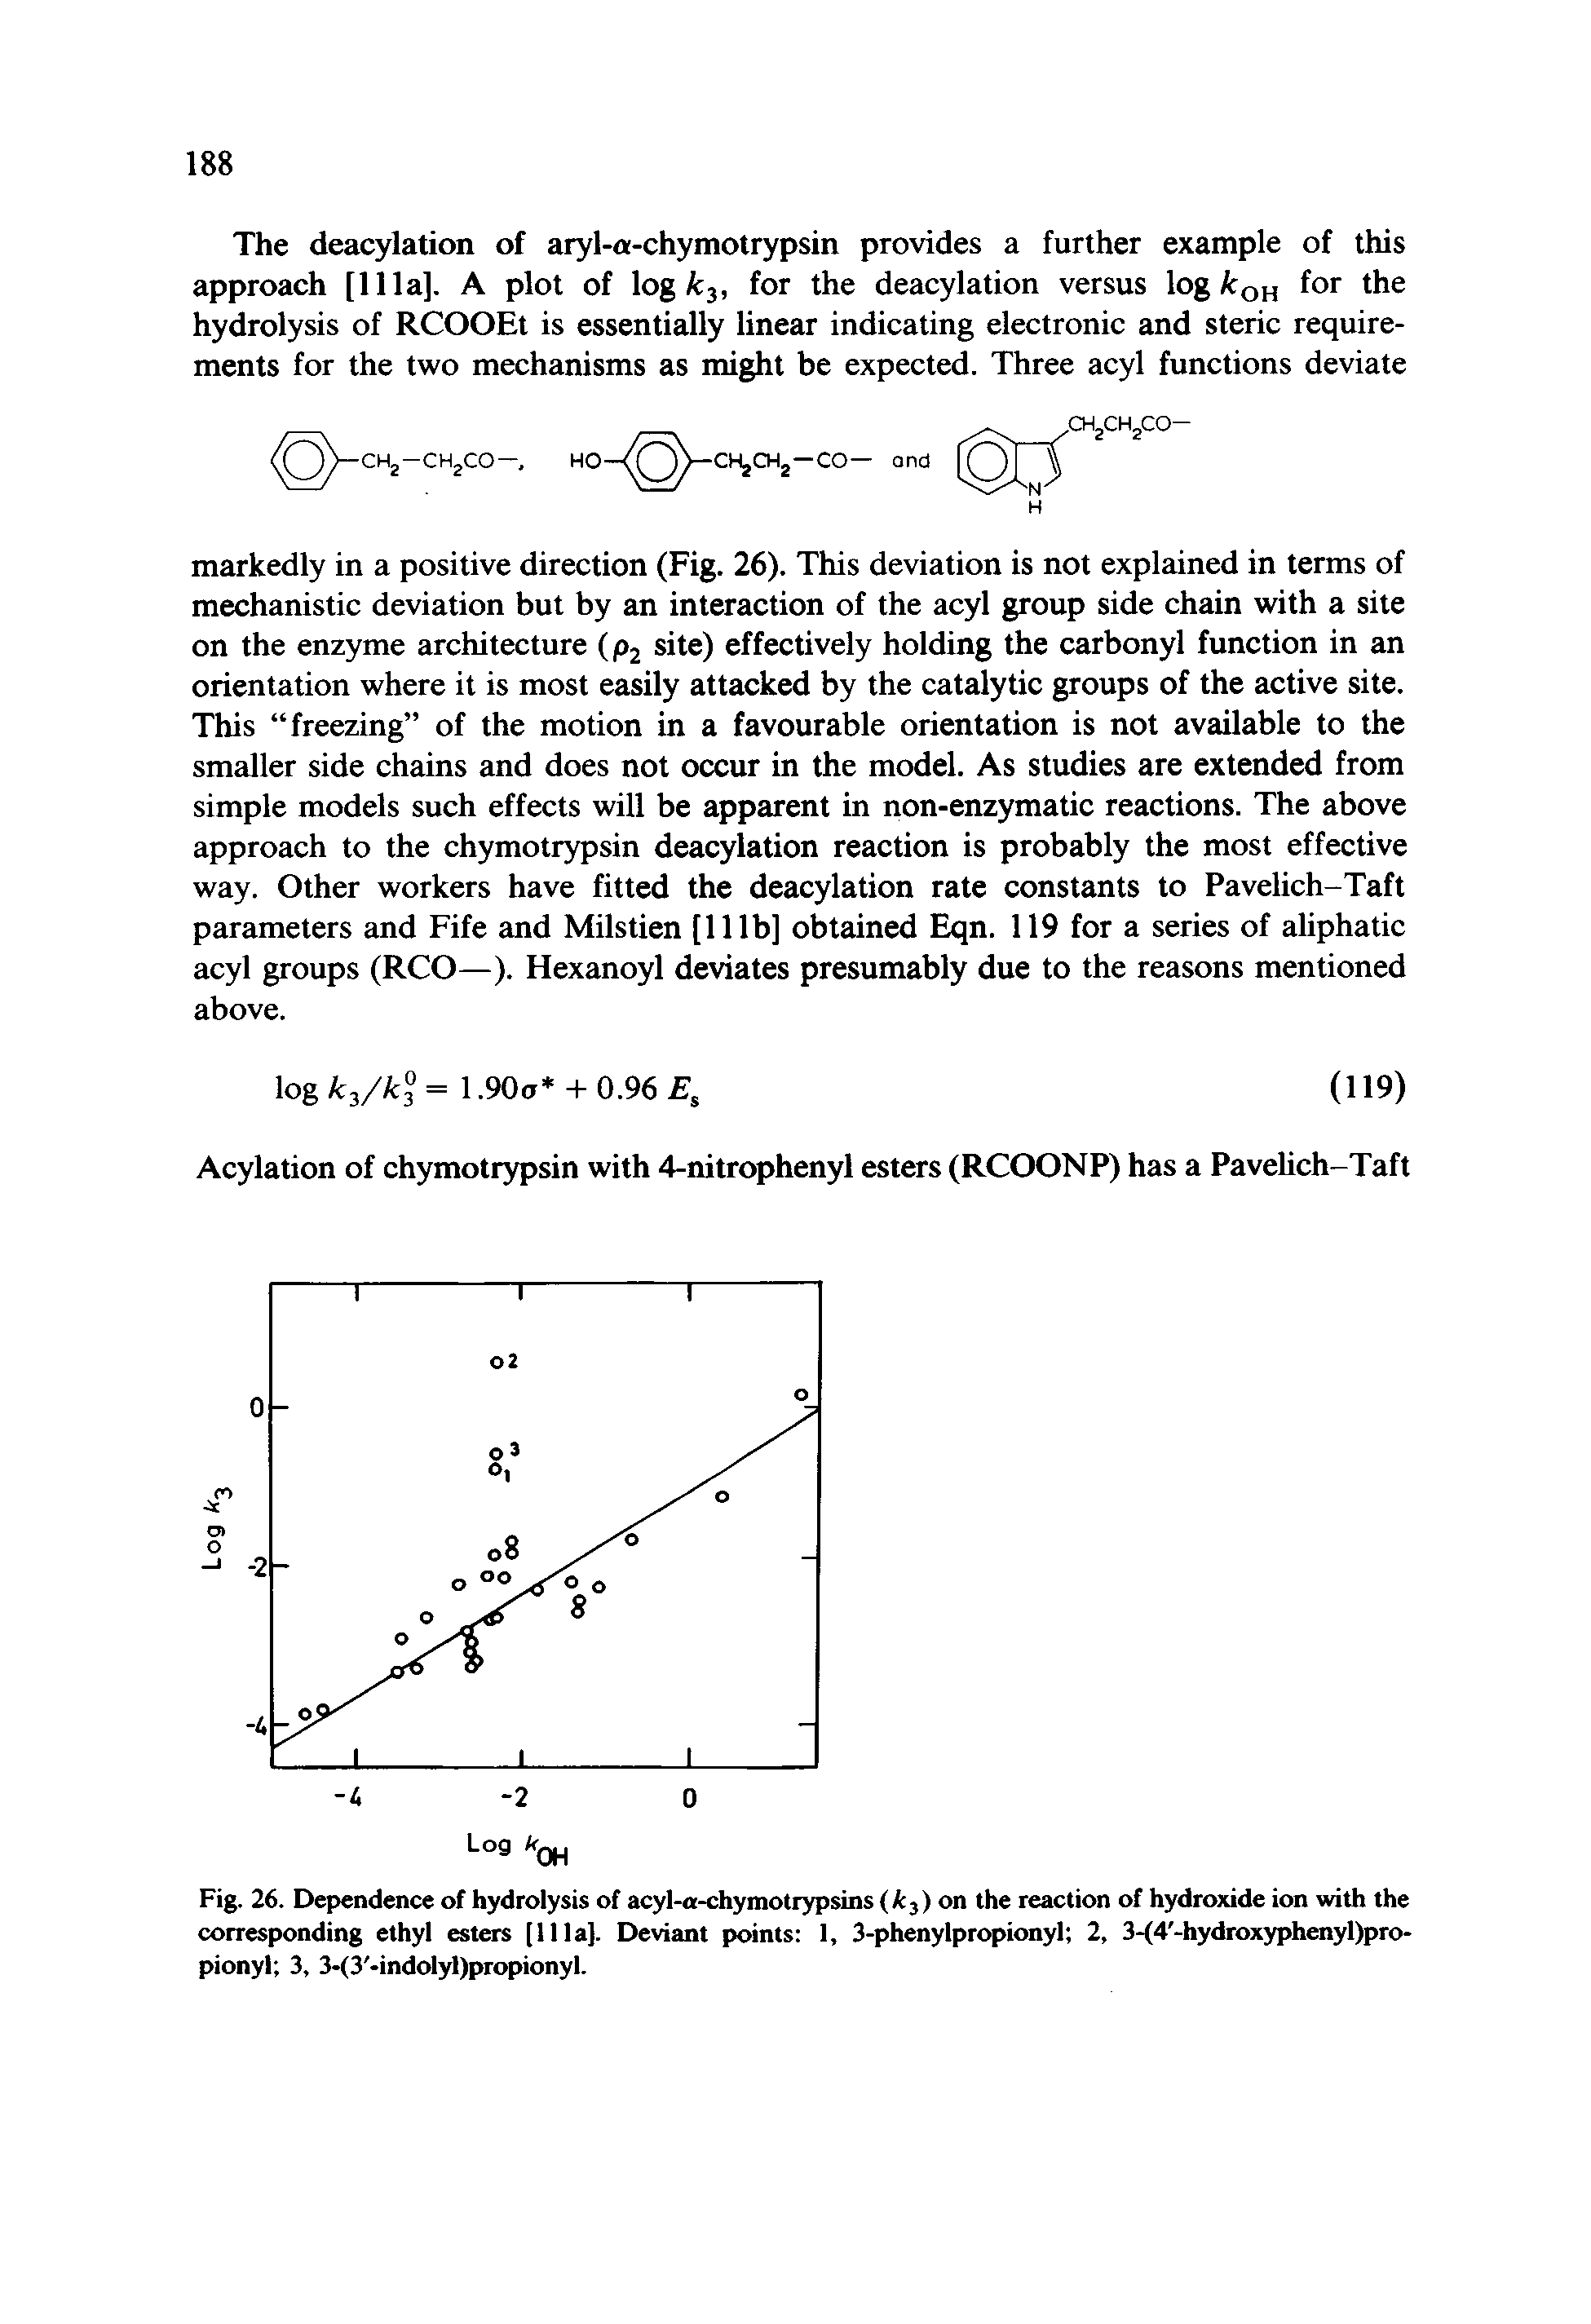 Fig. 26. Dependence of hydrolysis of acyl-a-chymotrypsins (t 3) on the reaction of hydroxide ion with the corresponding ethyl esters [11 la]. Deviant points 1, 3-phenylpropionyl 2, 3-(4 -hydroxyphenyl)pro-pionyt 3, 3-(3 -indolyl)propionyl.